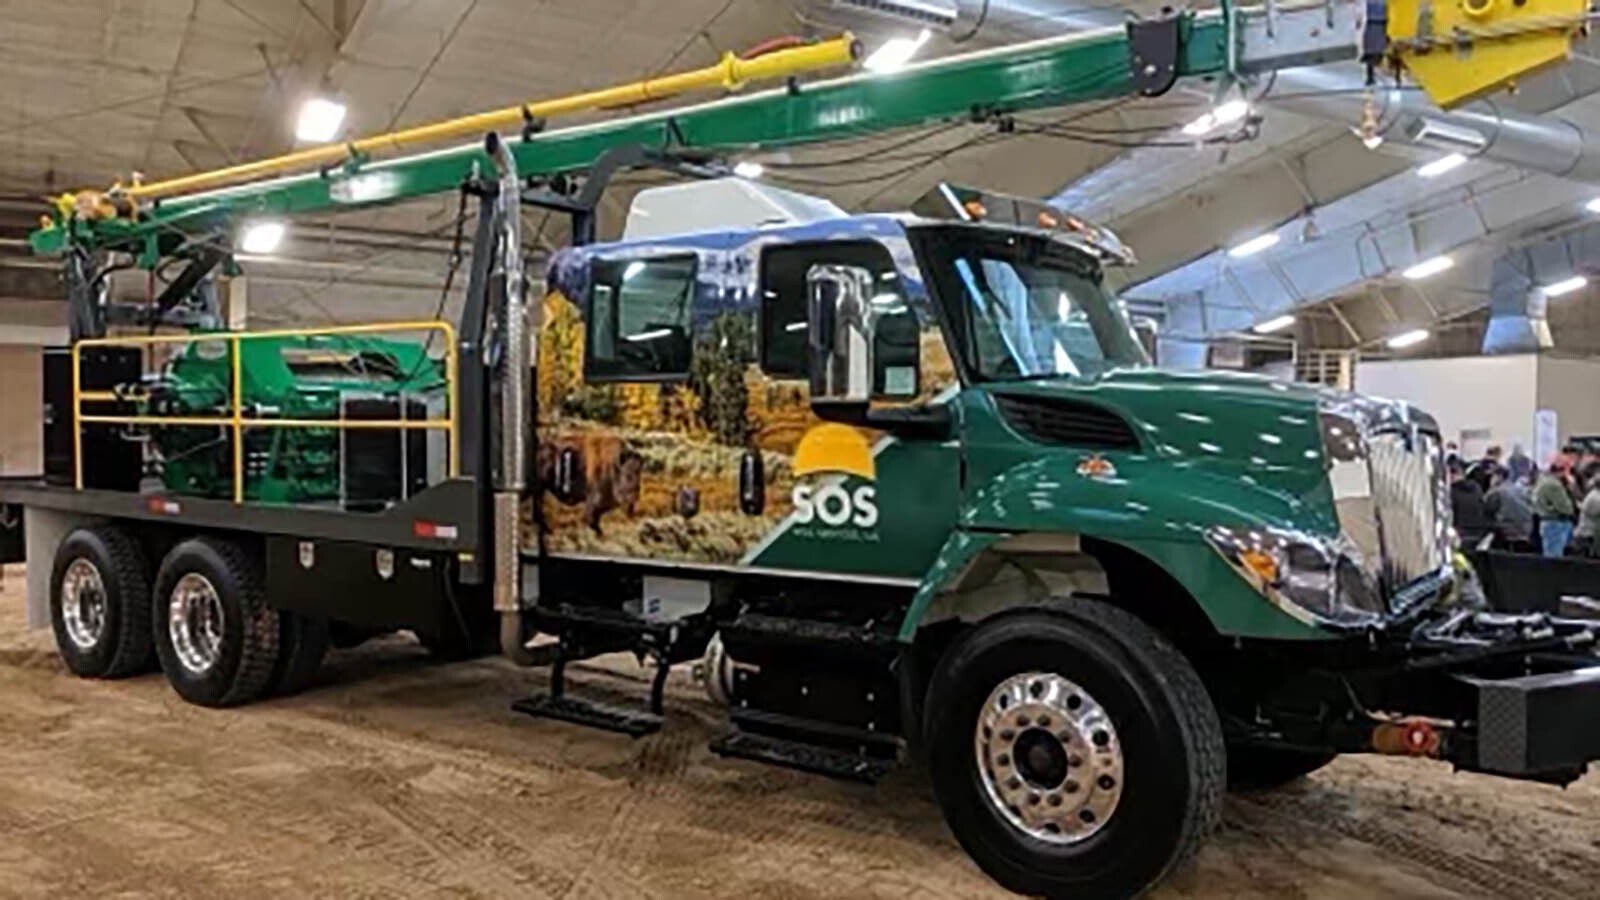 The La Barge-based SOS well companies has painted some of its trucks in honor of Wyoming’s wildlife, and also donated money toward wildlife crossings on Highway 189.